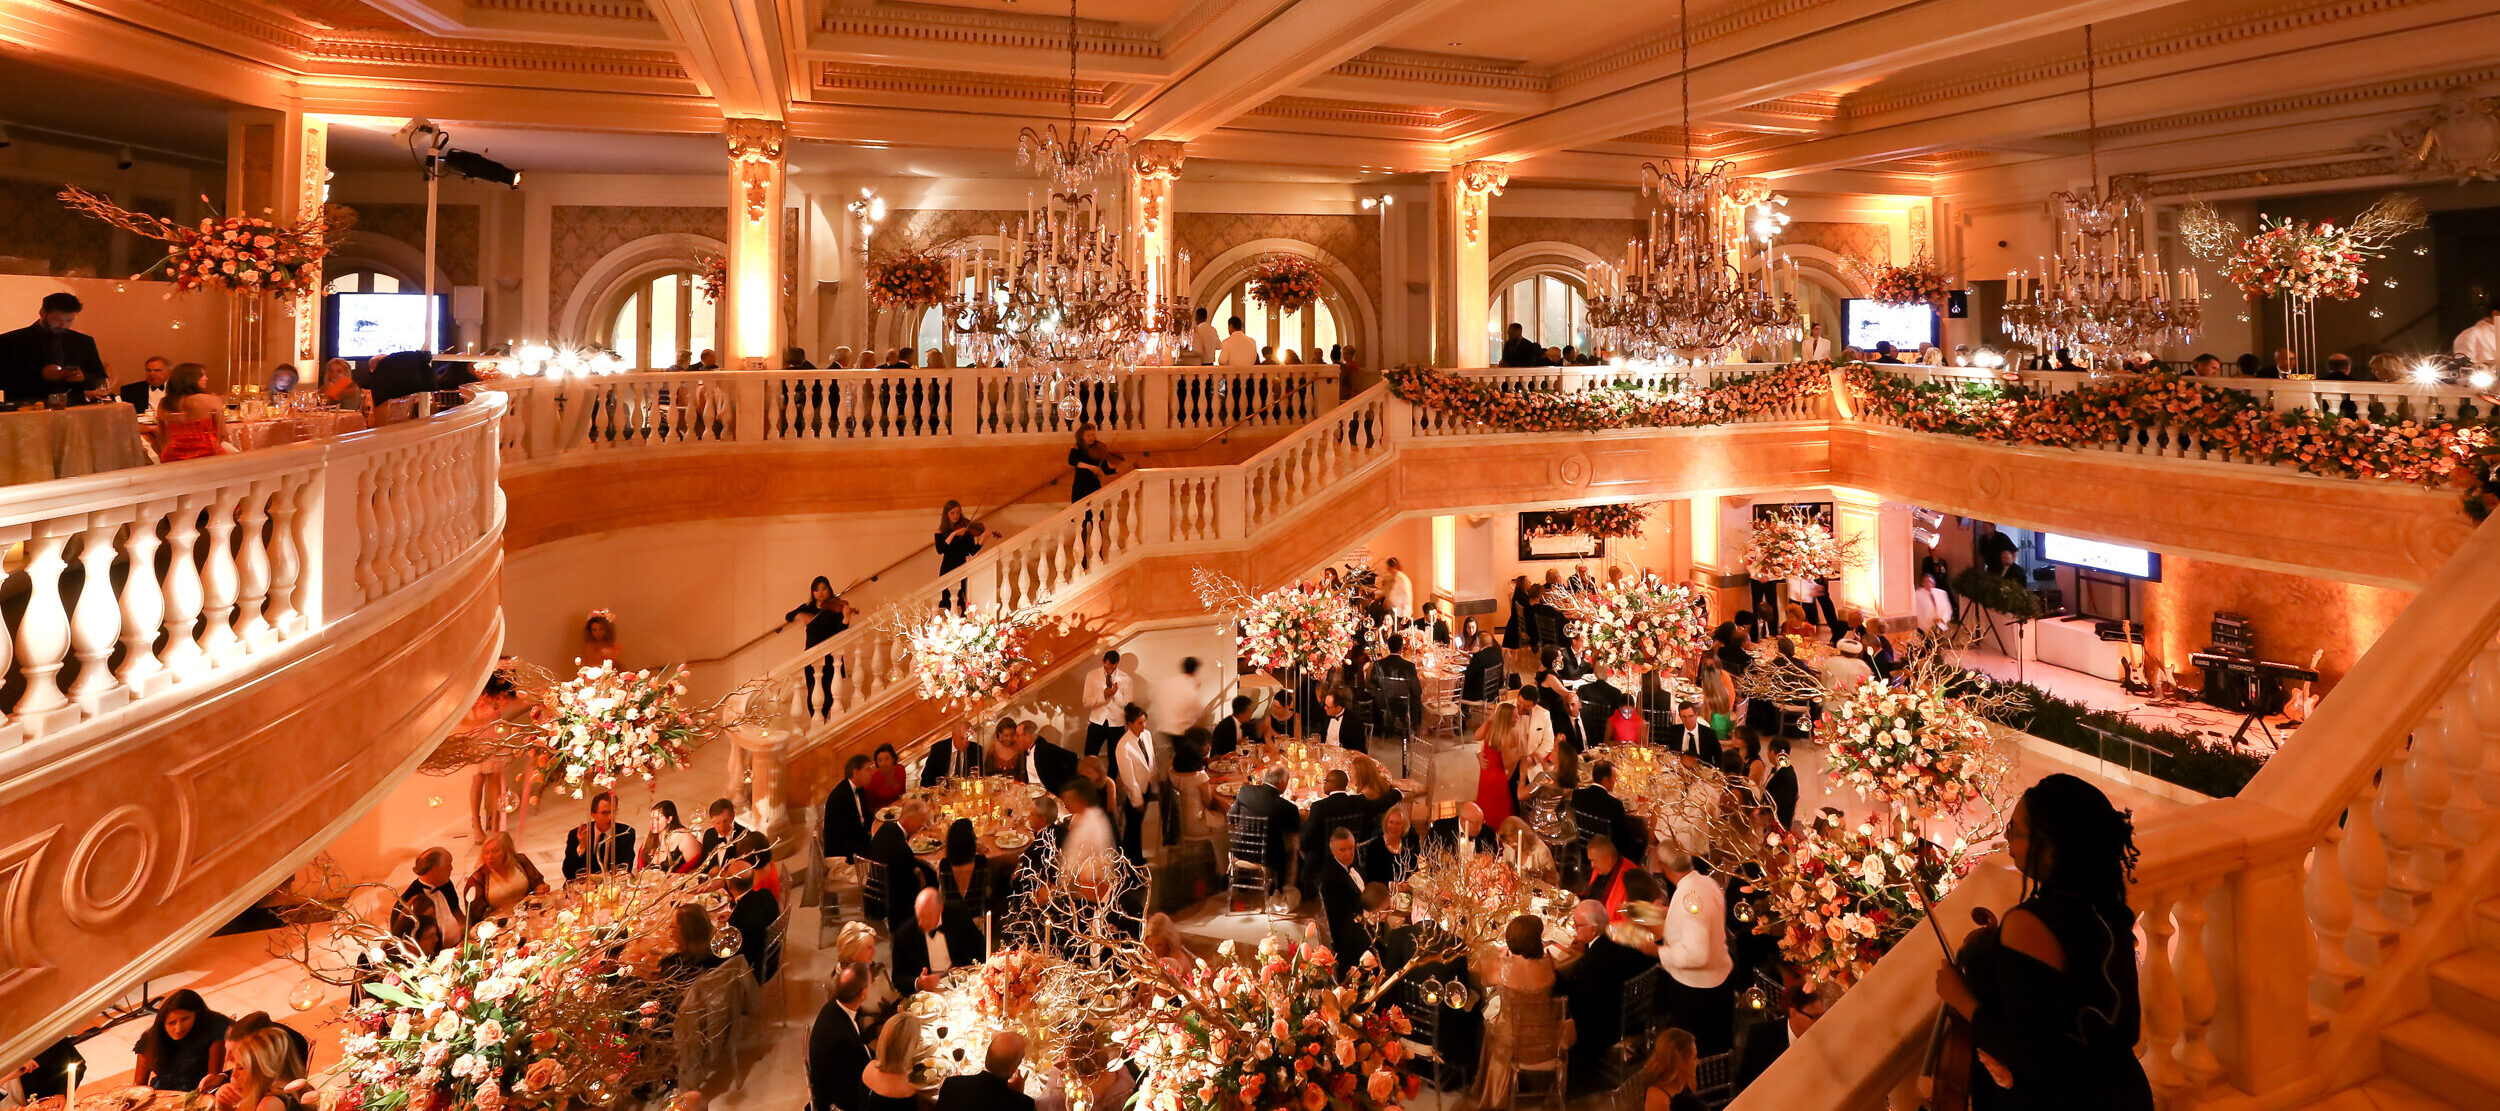 View of the gala from above looking out at the chandeliers, violin players on the marble staircase, and people gathered at round tables surrounded by abundant floral arrangements.